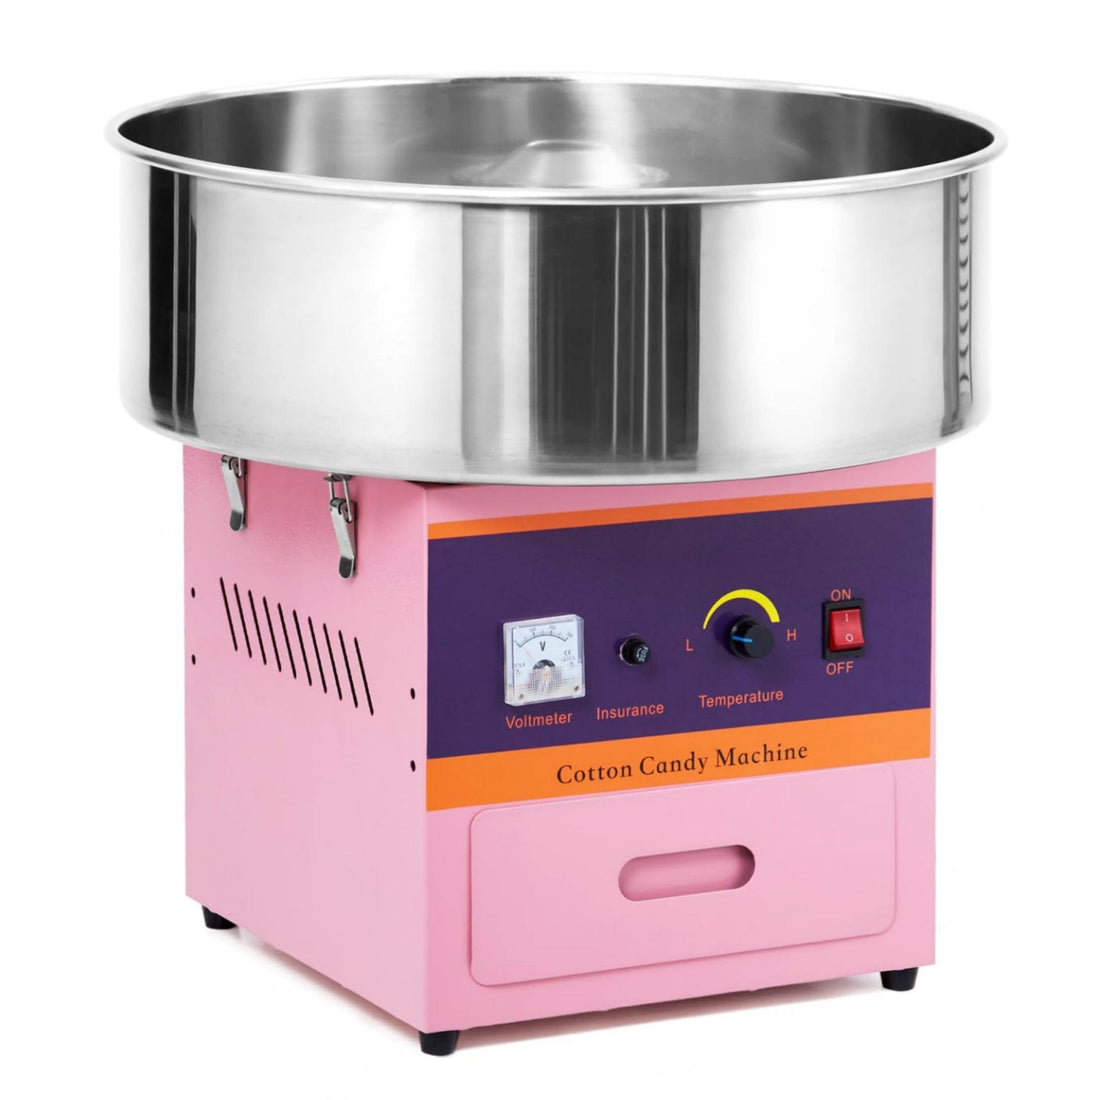 Cotton Candy Machine Commercial 1000W Electric Cotton Candy Machine Cotton Candy Maker Pink